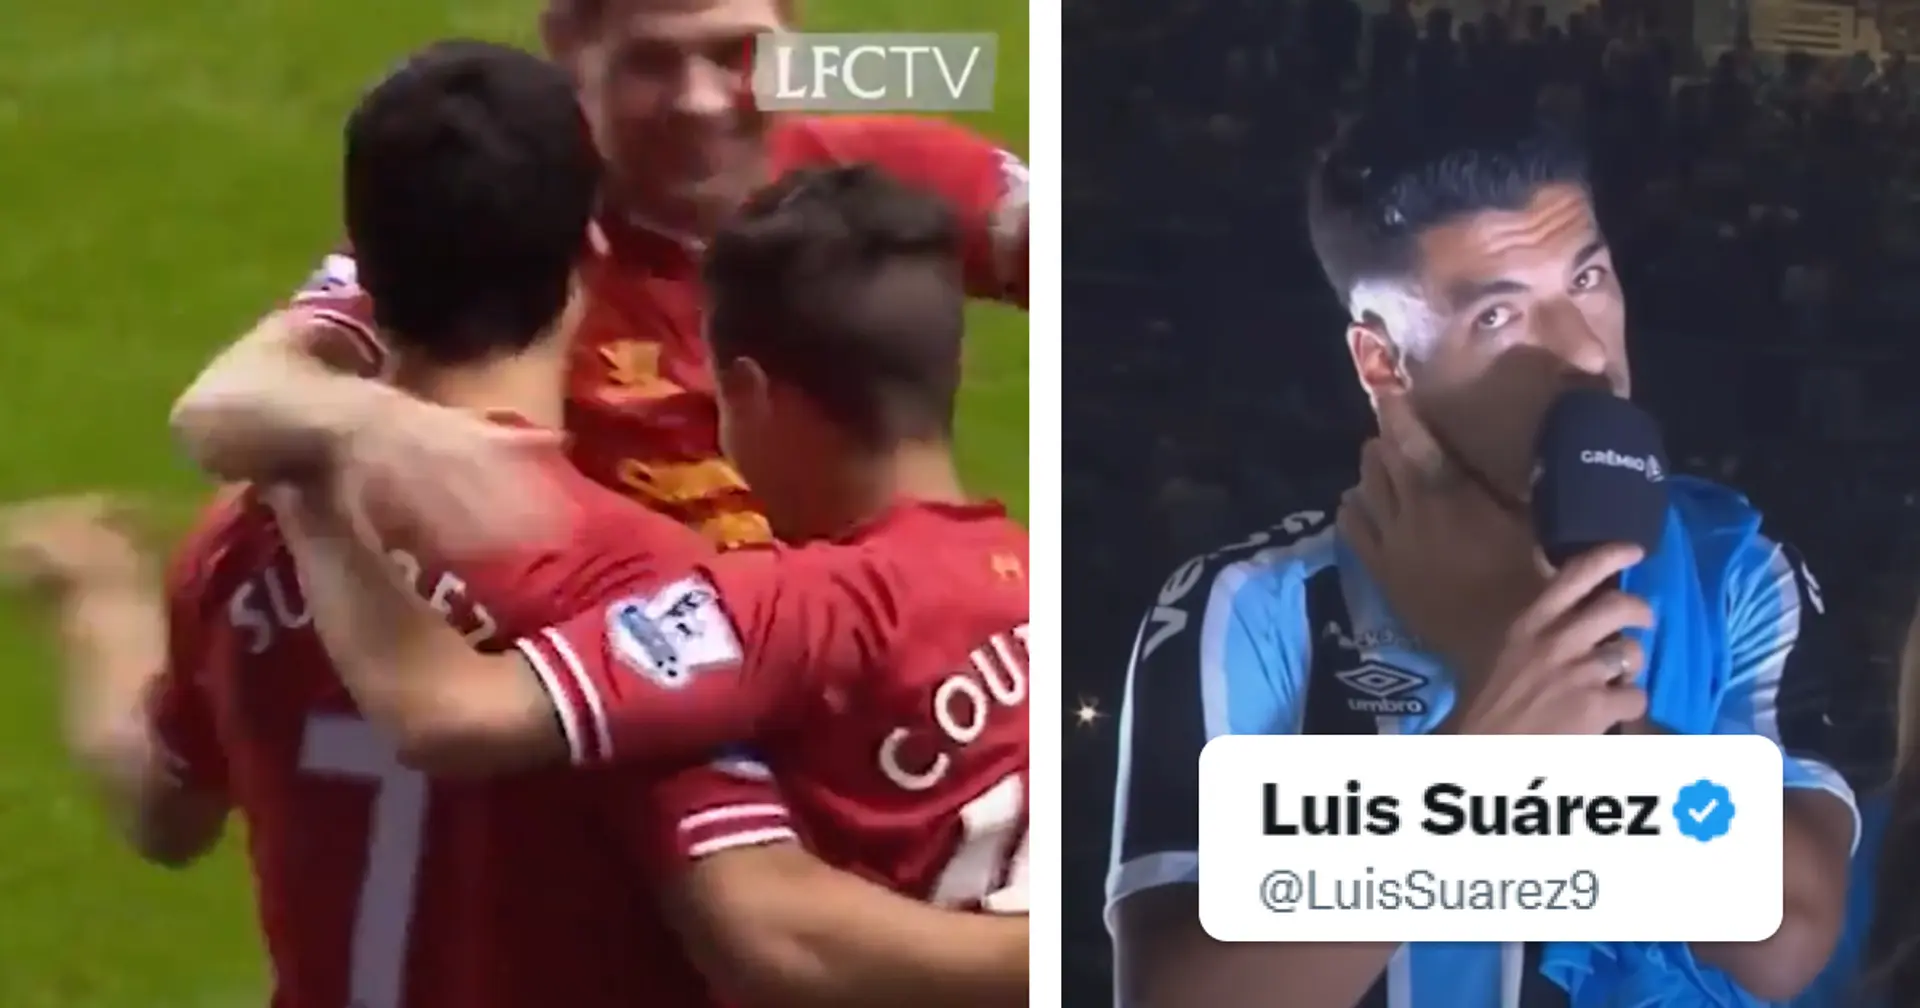 Luis Suarez reacts with 3 words in Spanish to his iconic Liverpool performance